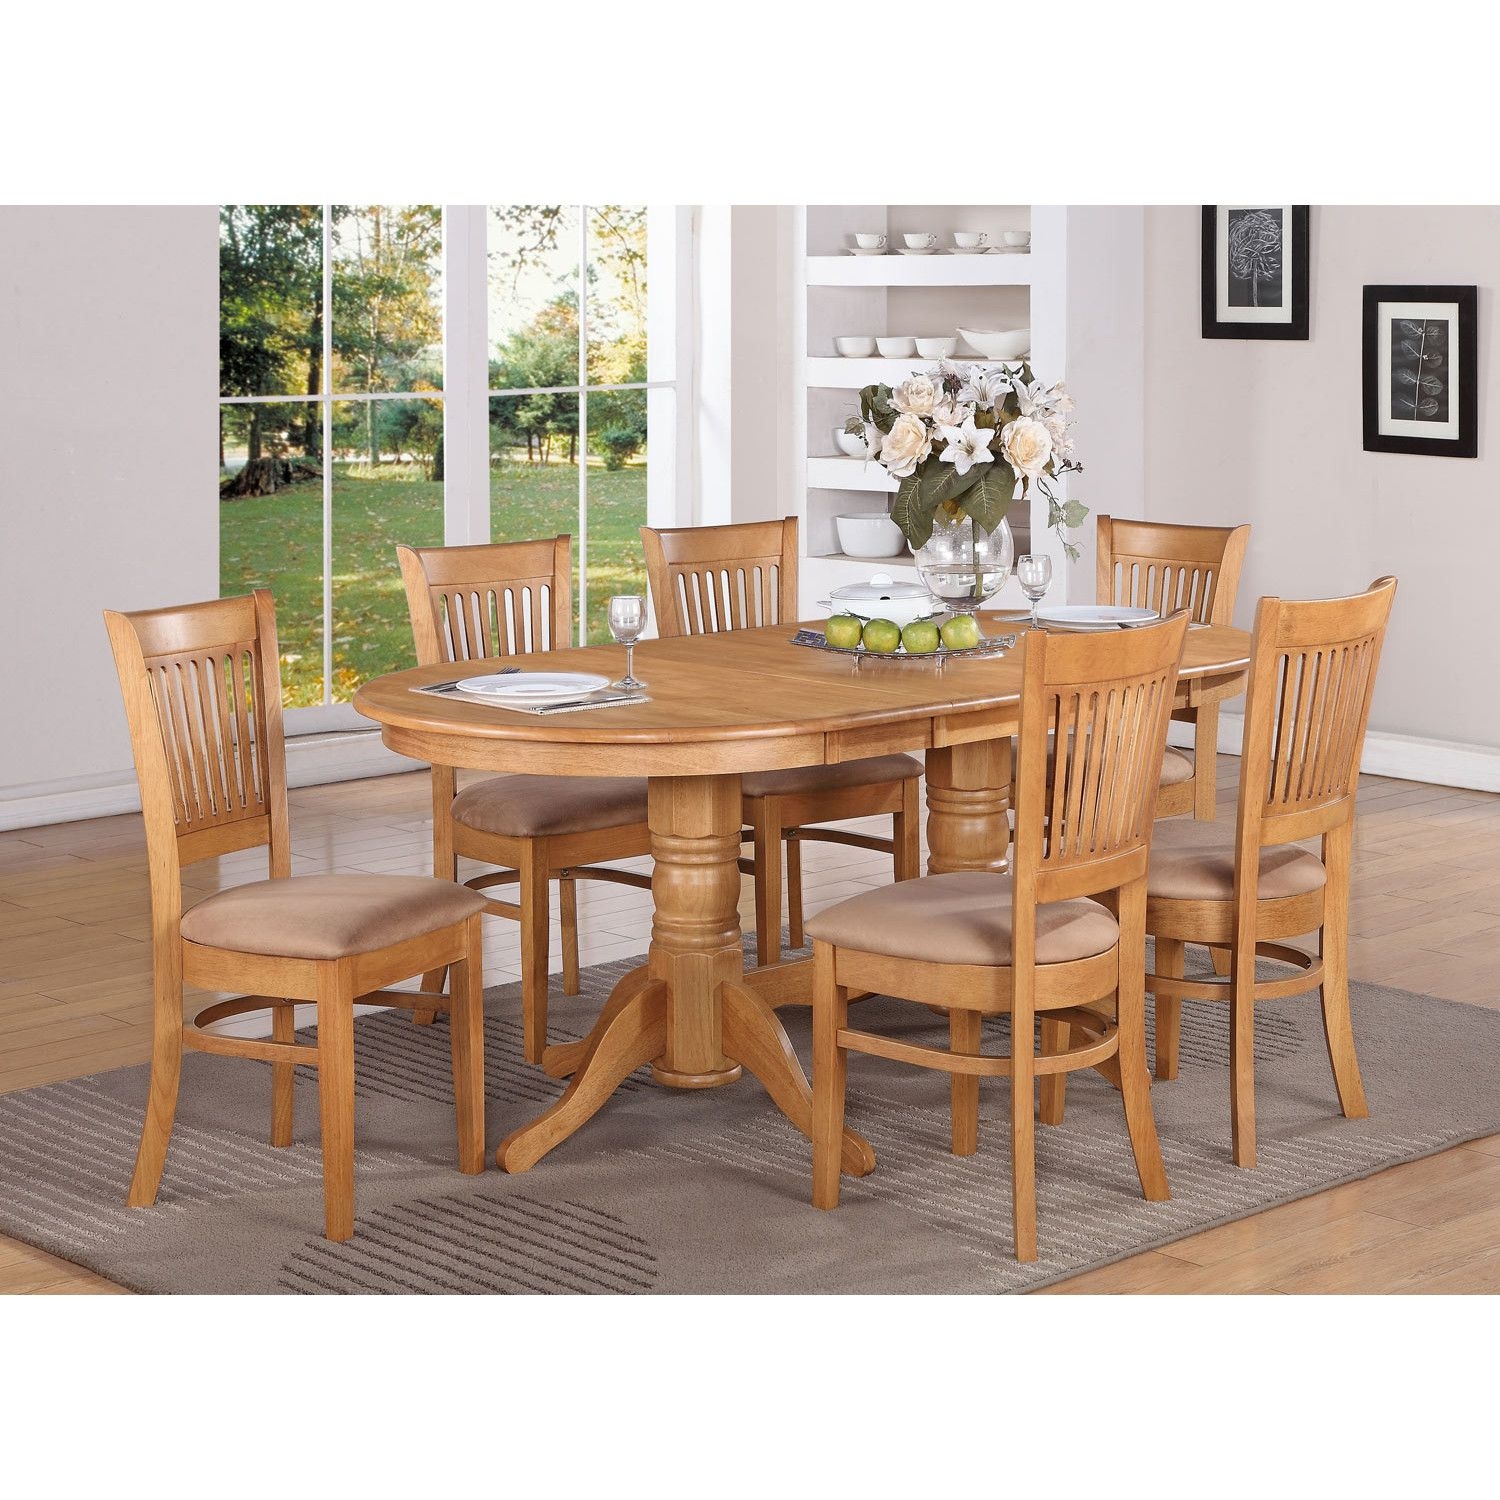 Oval dinette kitchen dining set table w 6 upholstery chairs